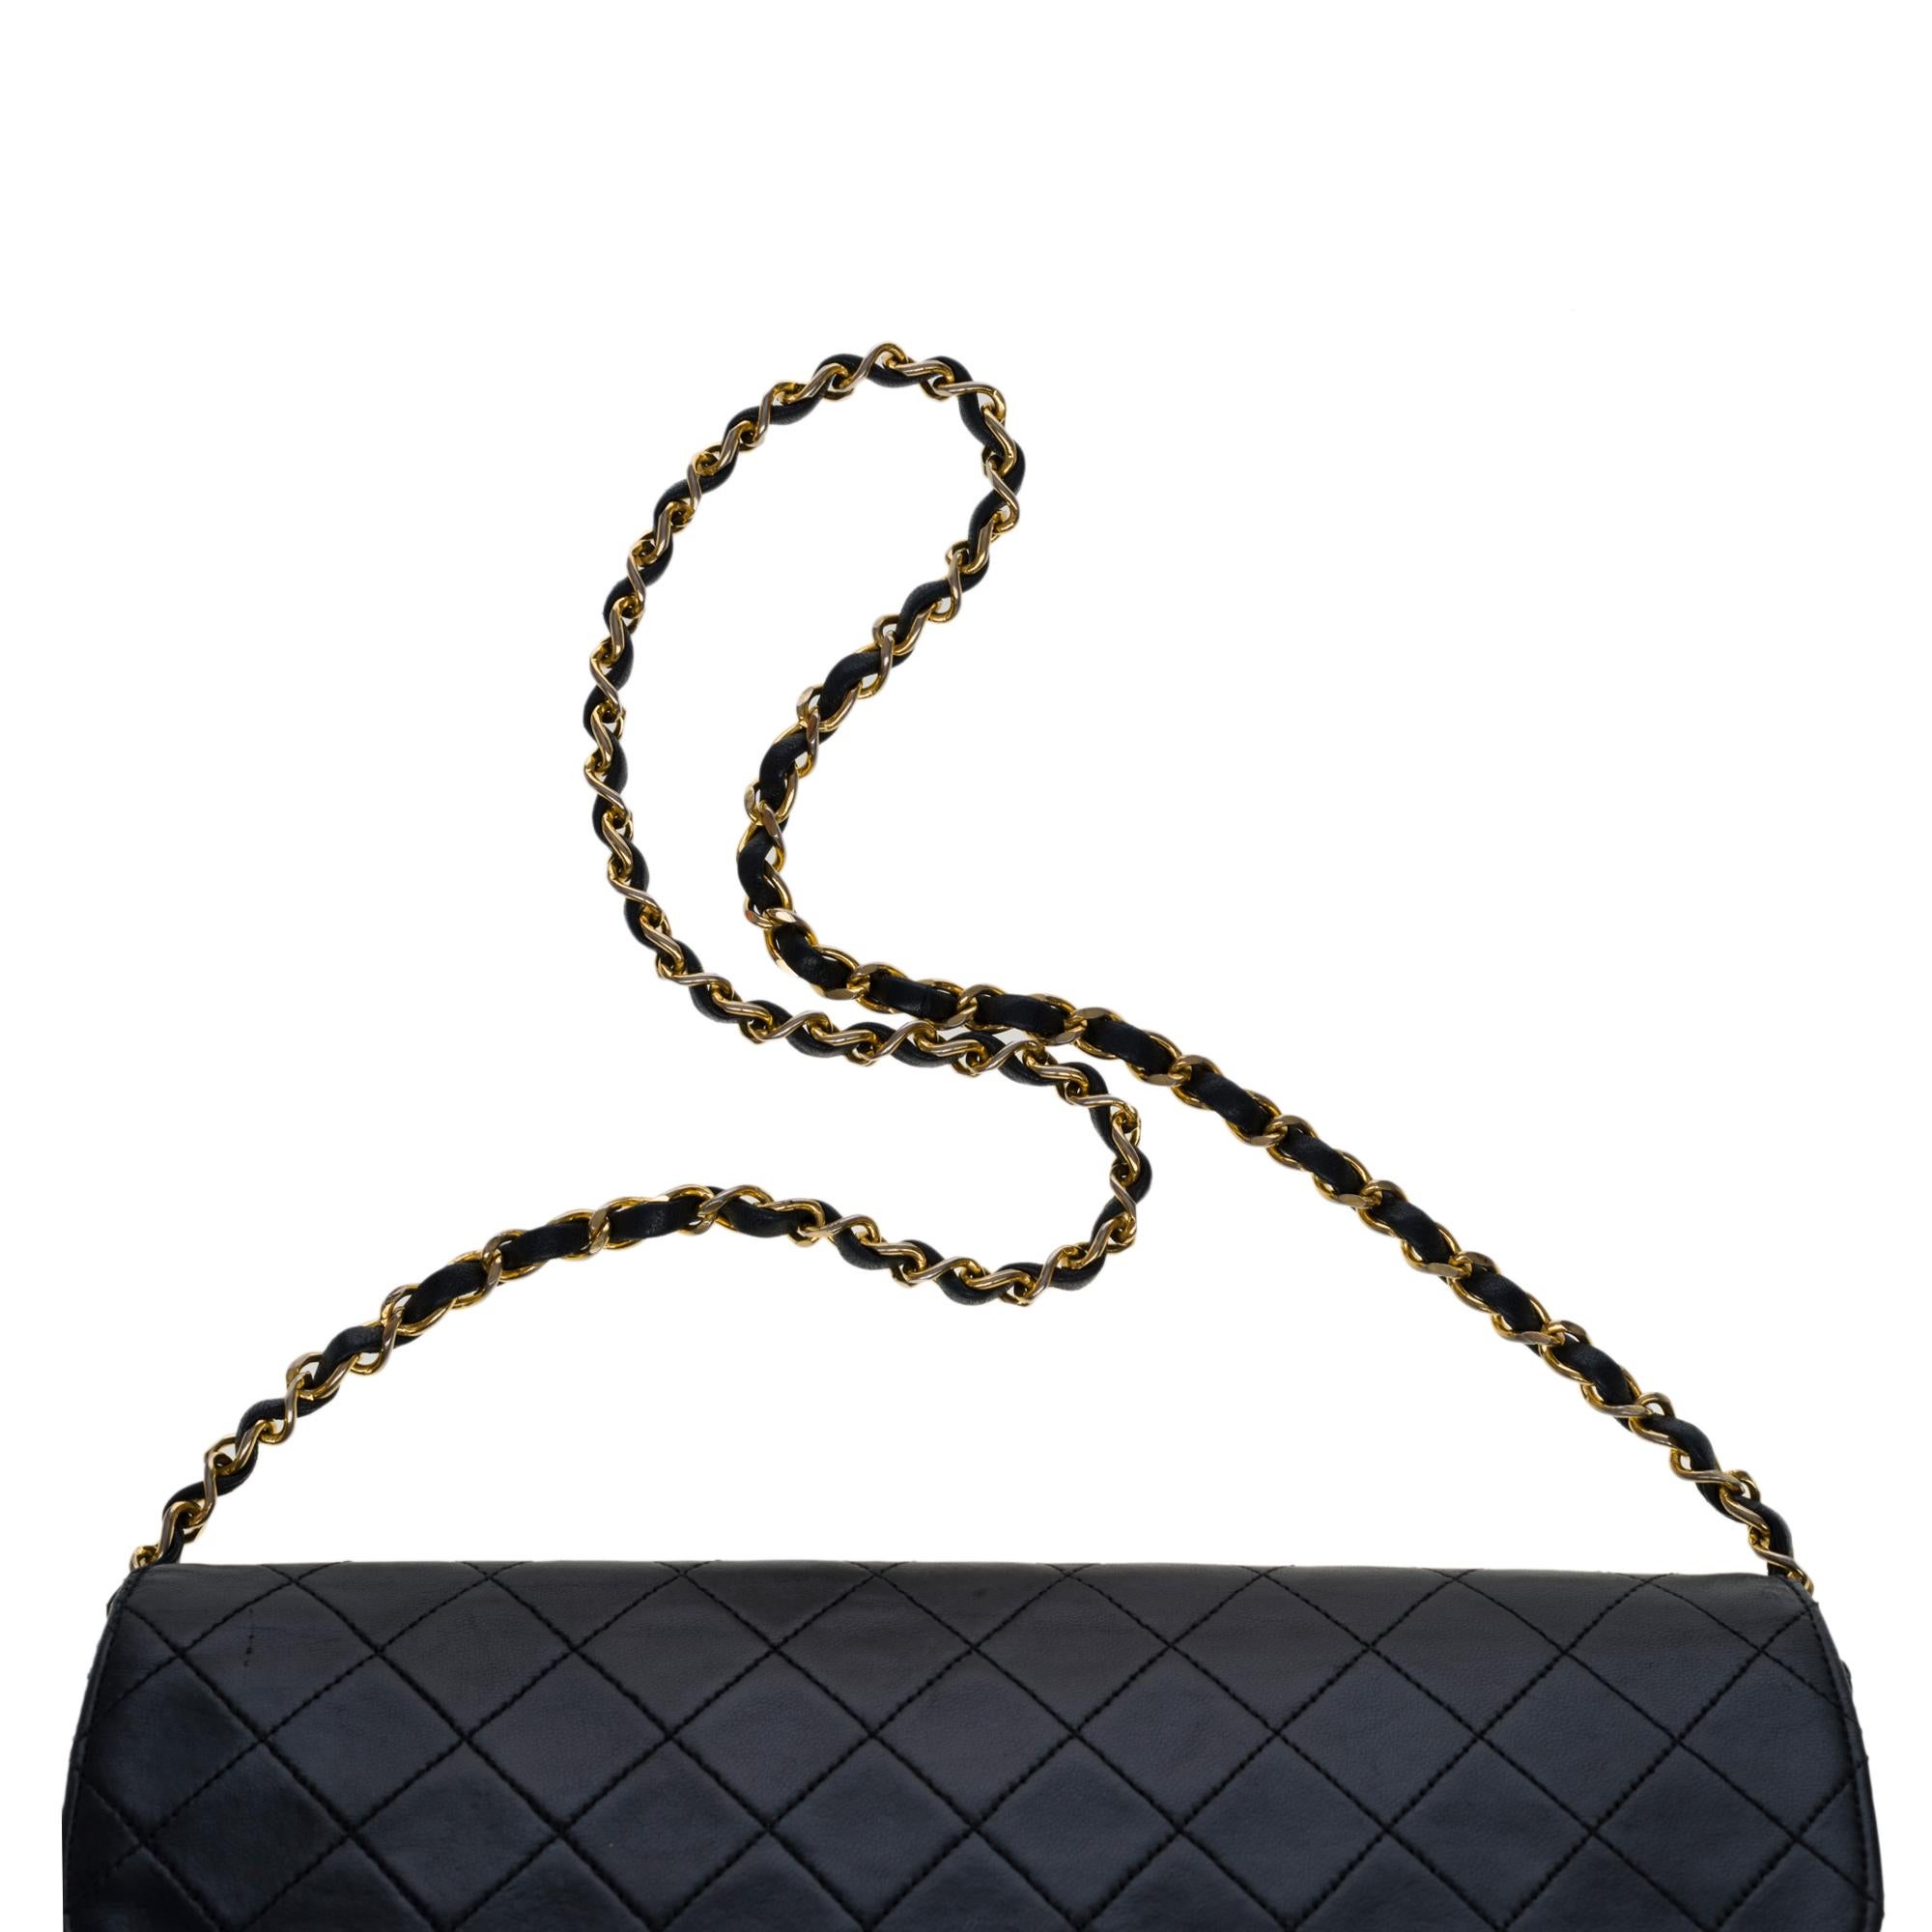 Chanel Classic Flap shoulder bag in black quilted lambskin, GHW 3